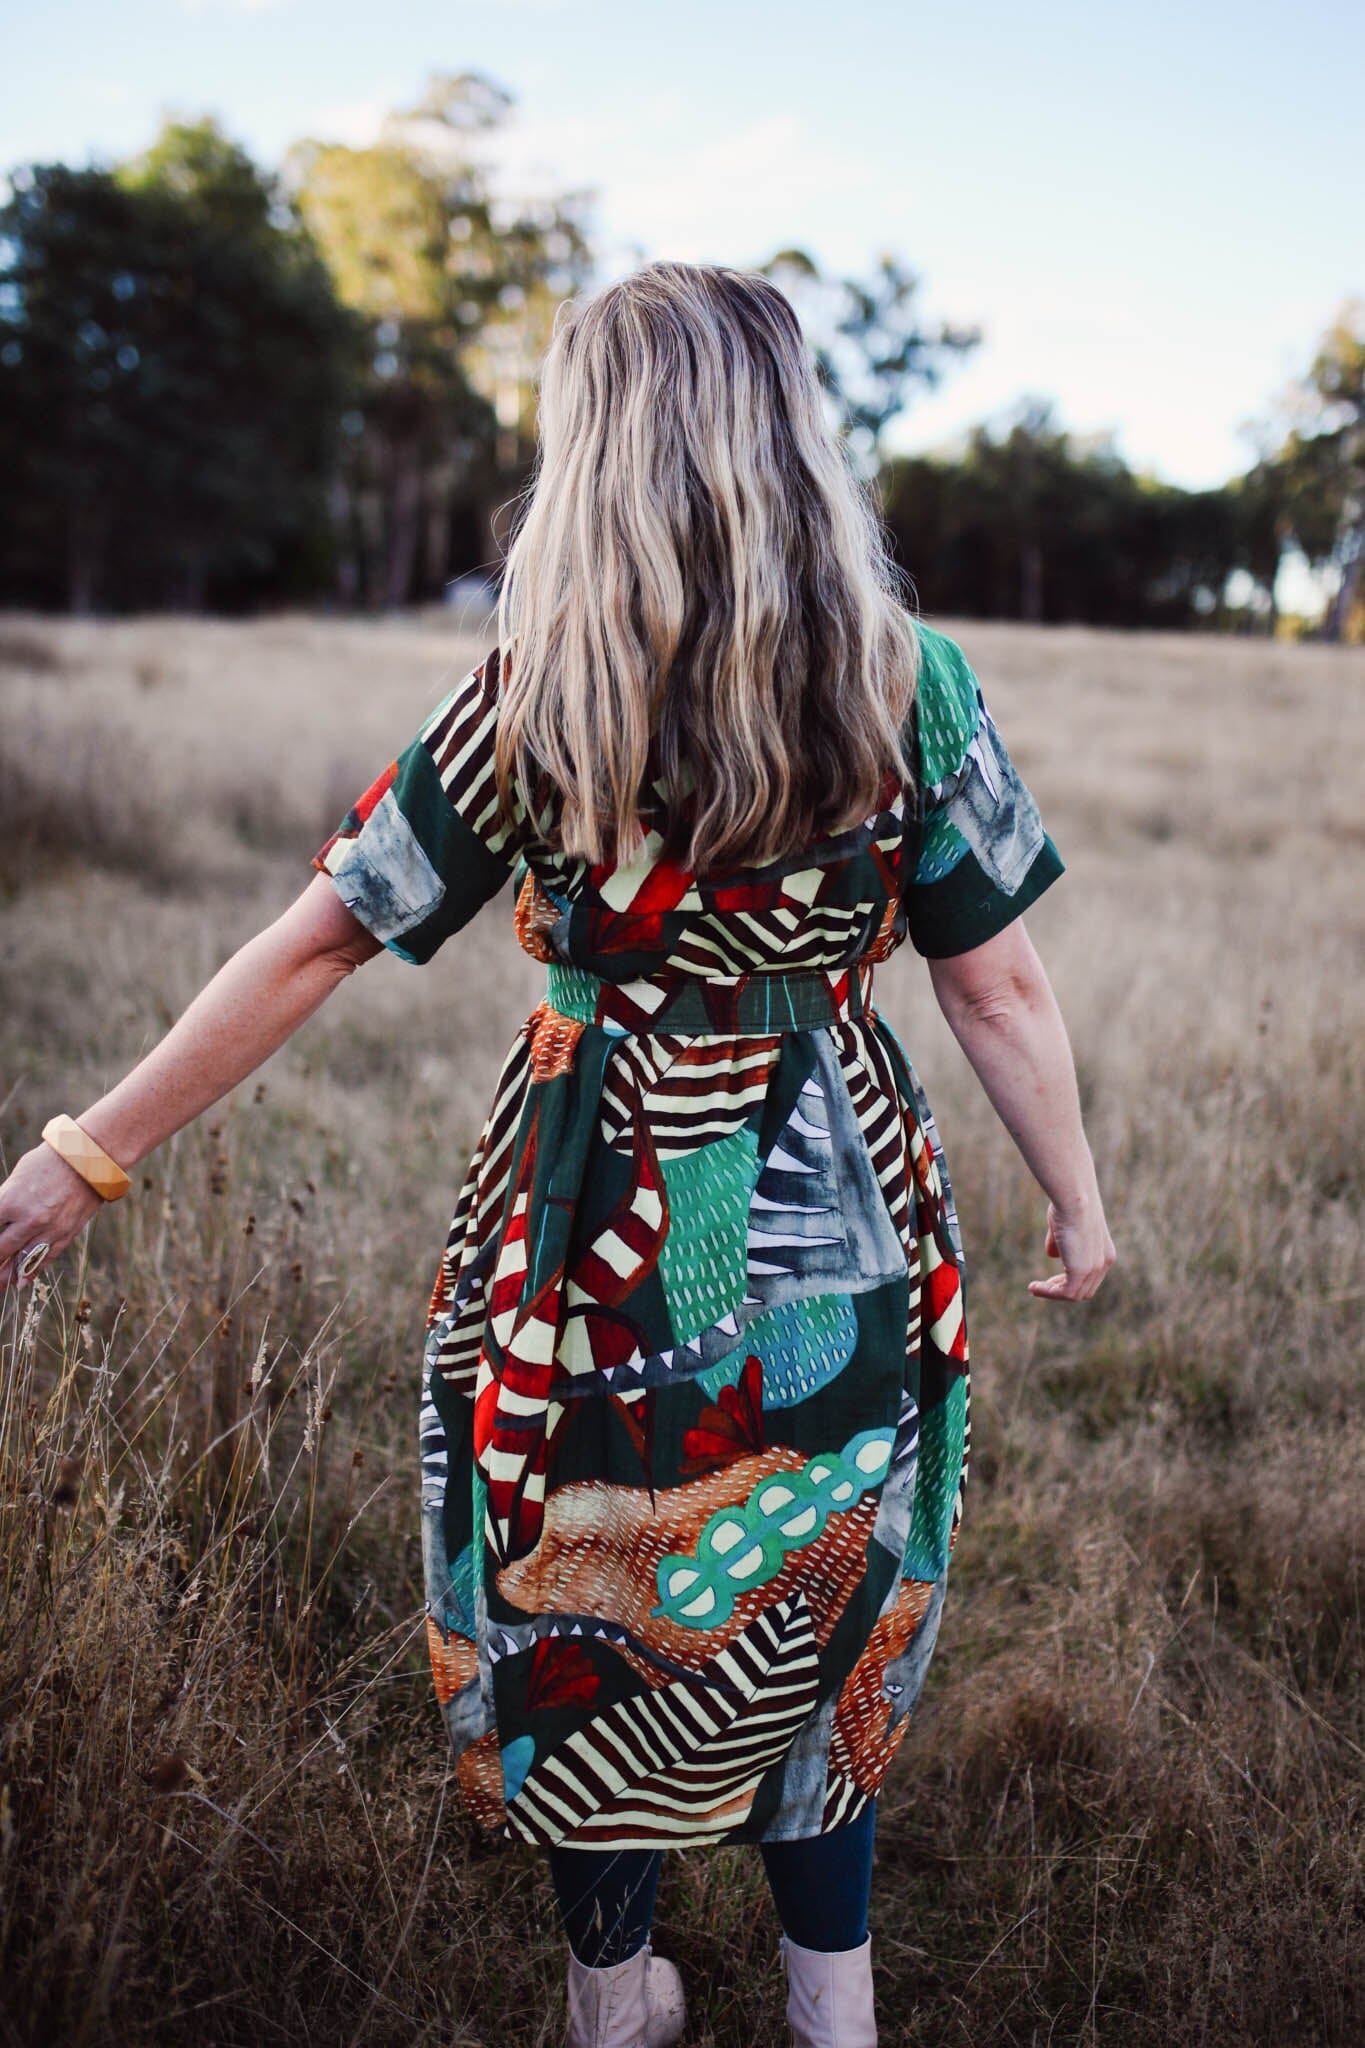 Organic Cocoon Dress - Lost Thylacine Dress The Spotted Quoll 